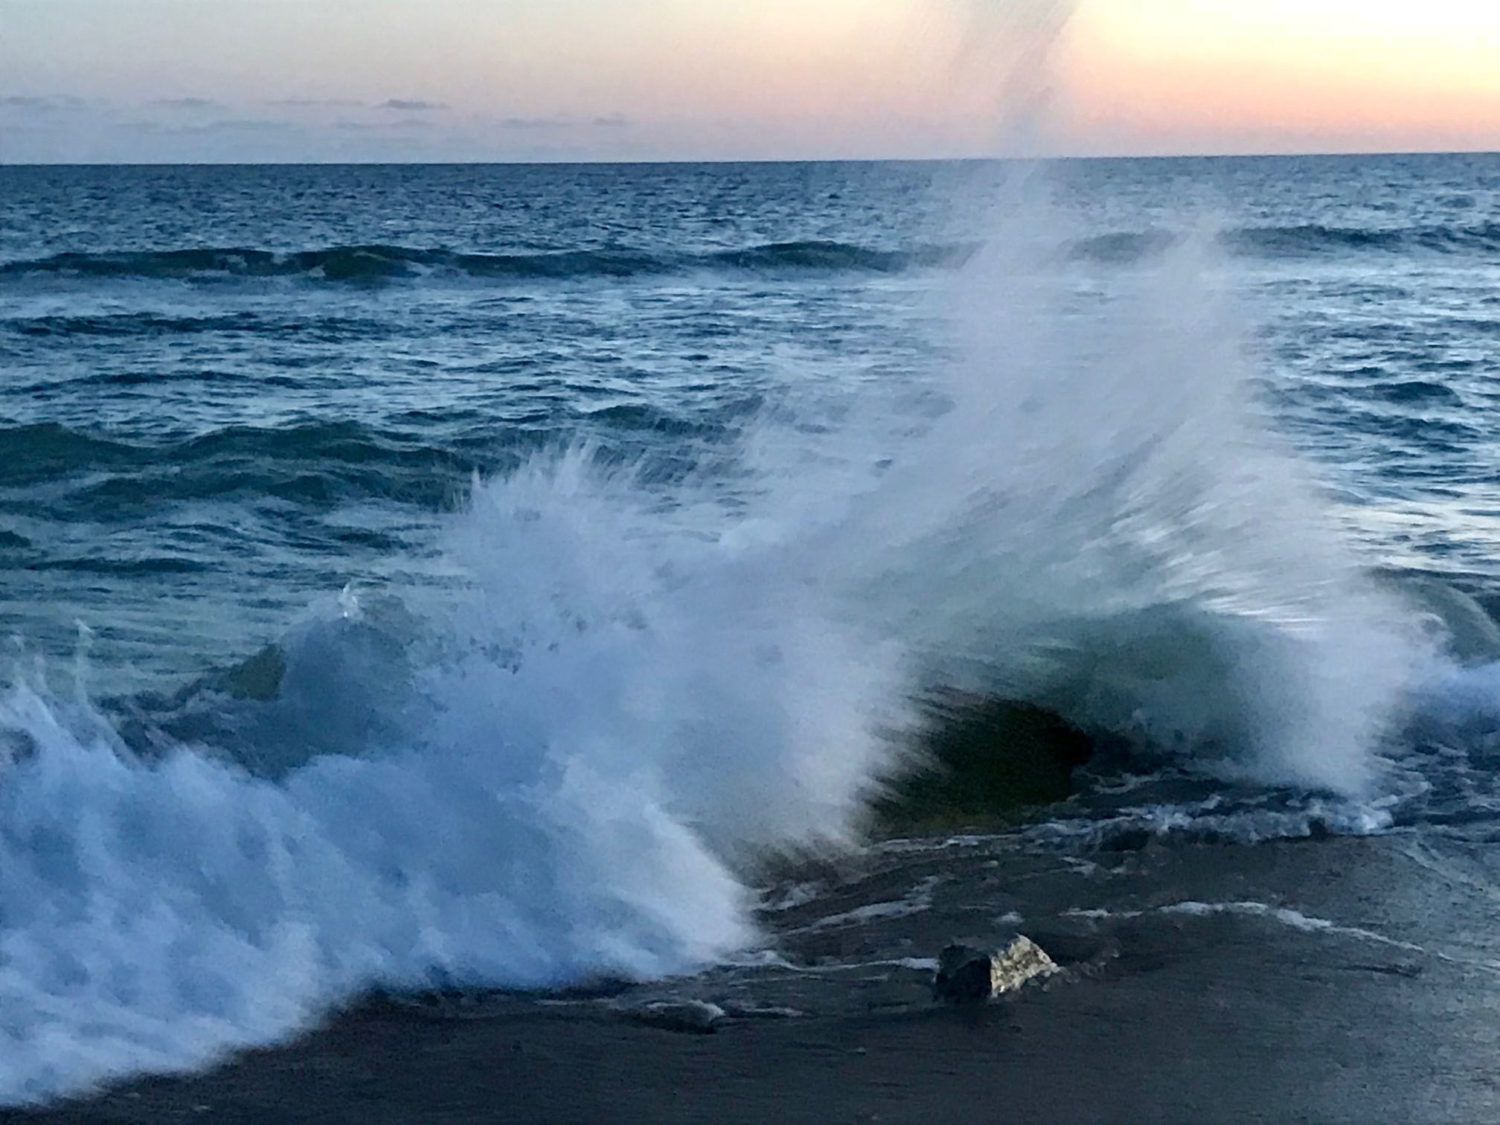 A wave crashes dramatically on a rock at the beach in front of a pastel sunset.